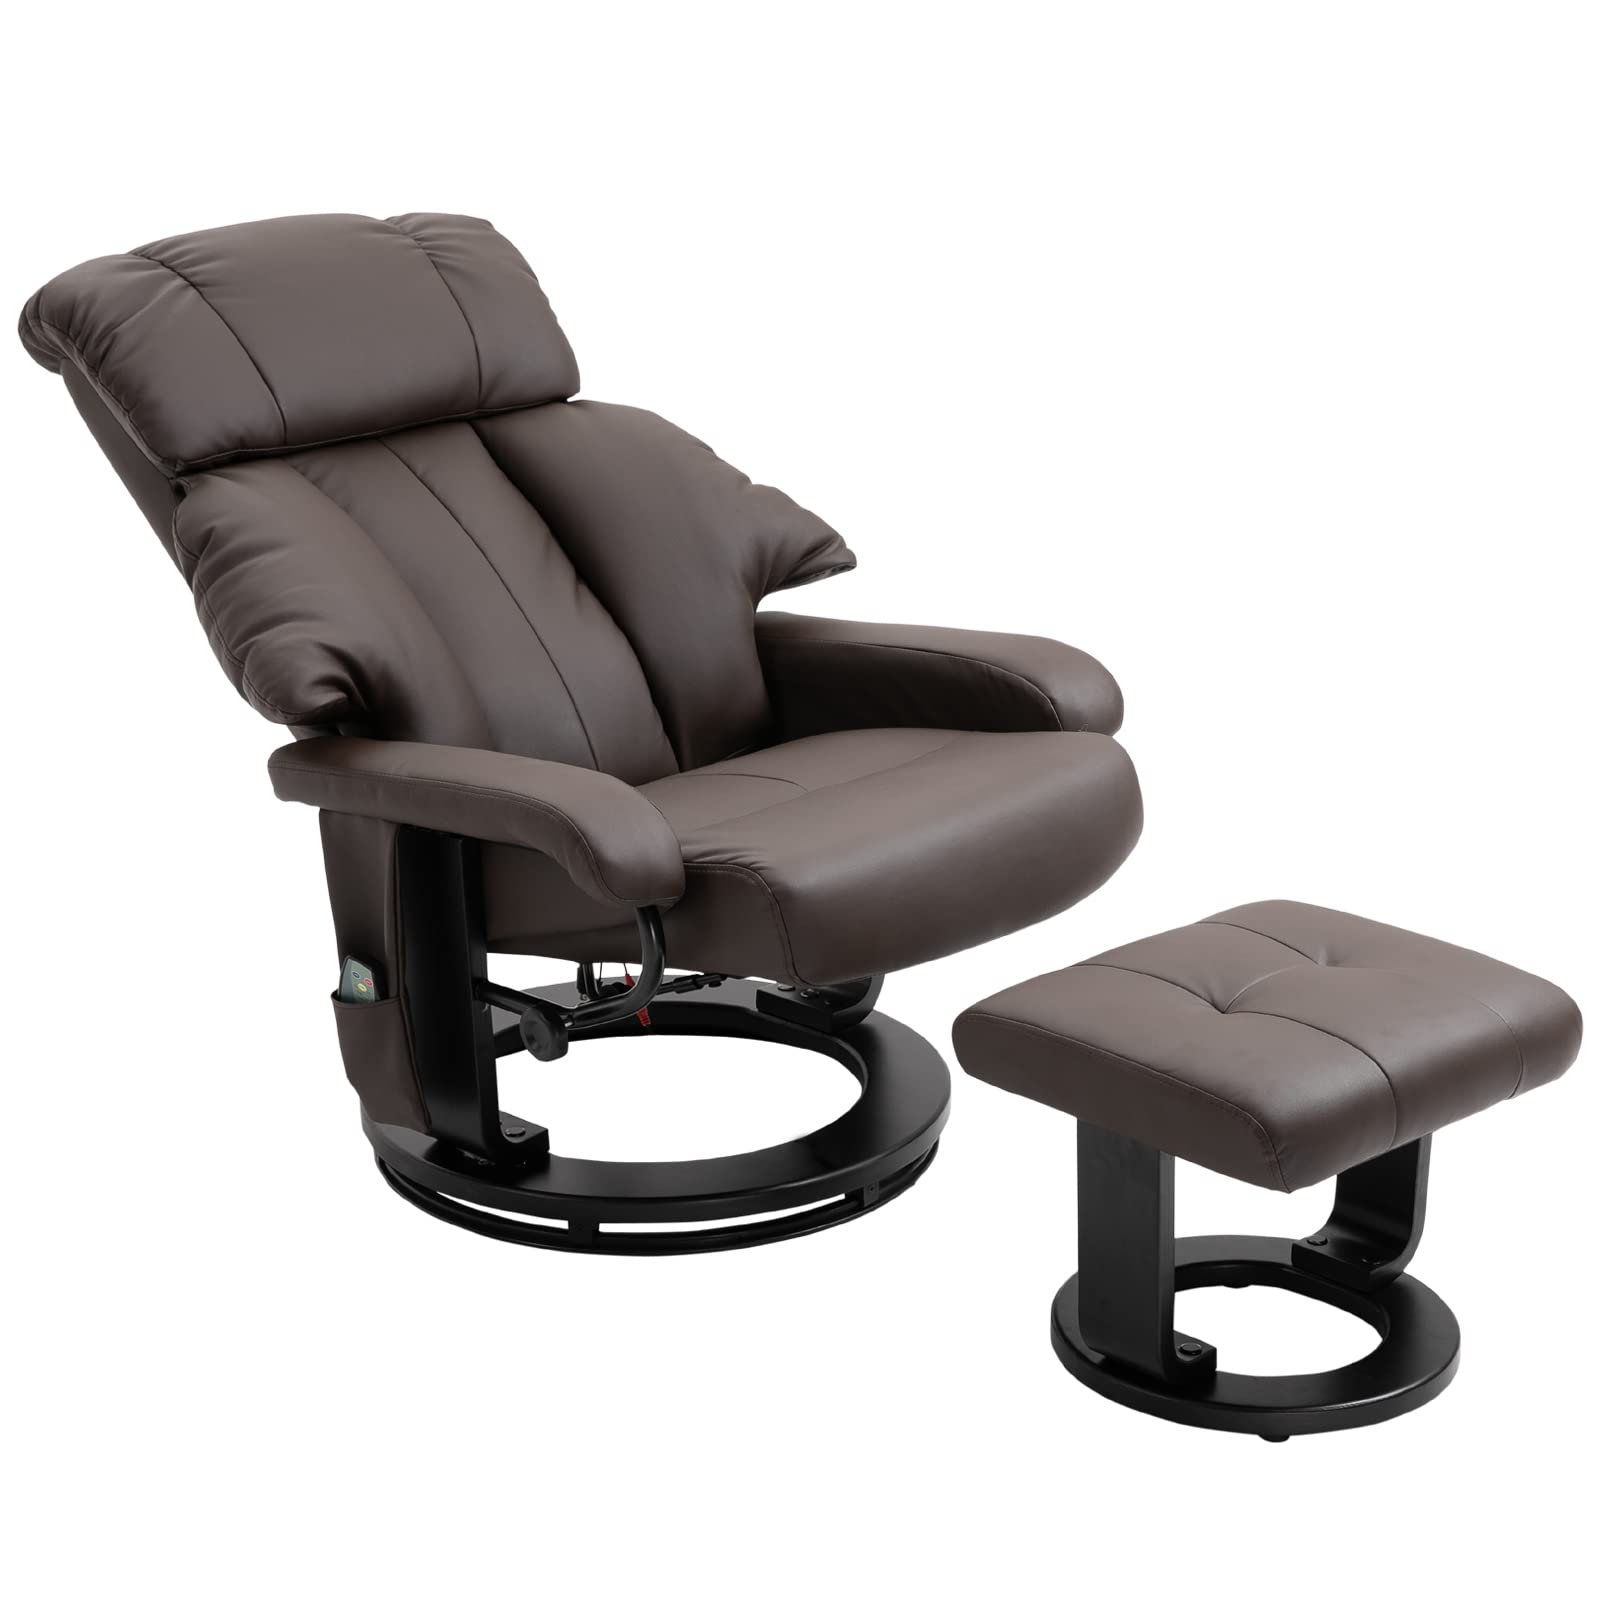 Homcom Recliner With Ottoman Footrest Recliner Chair With Vibration Massage Faux Leather And Swivel Wood Base For Living Room An